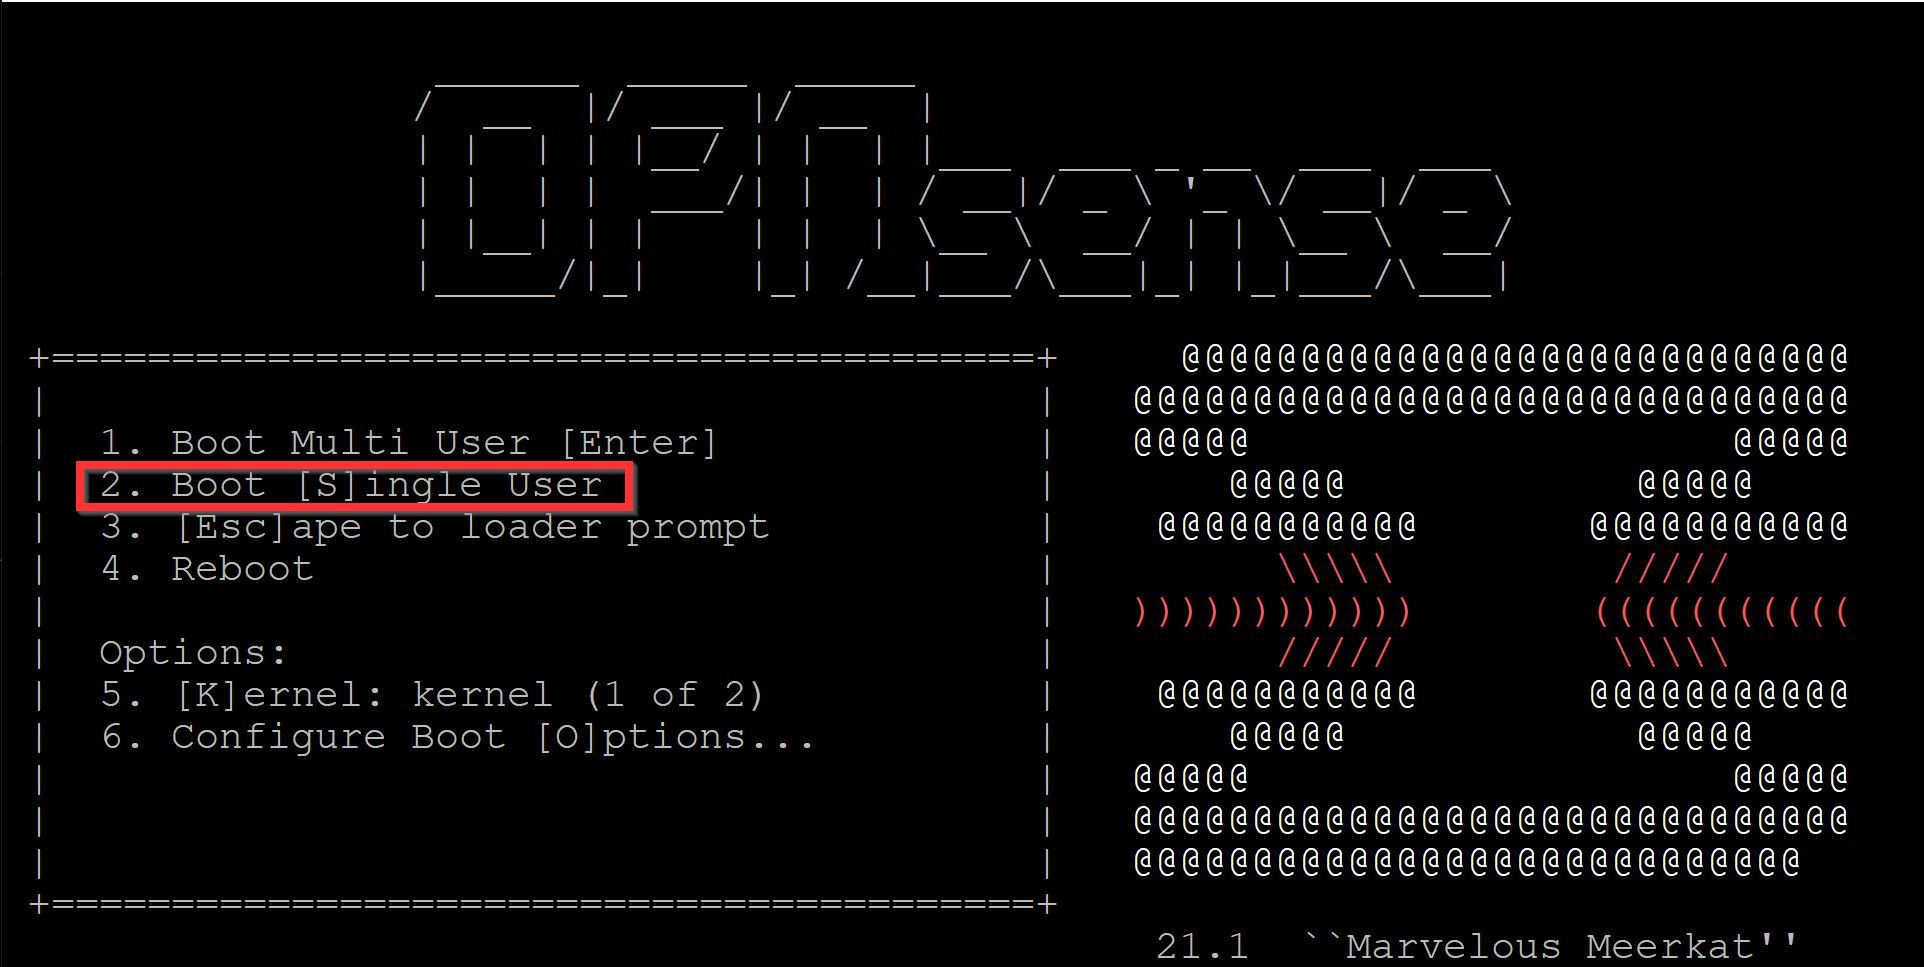 How to Reset the OPNsense Root Password